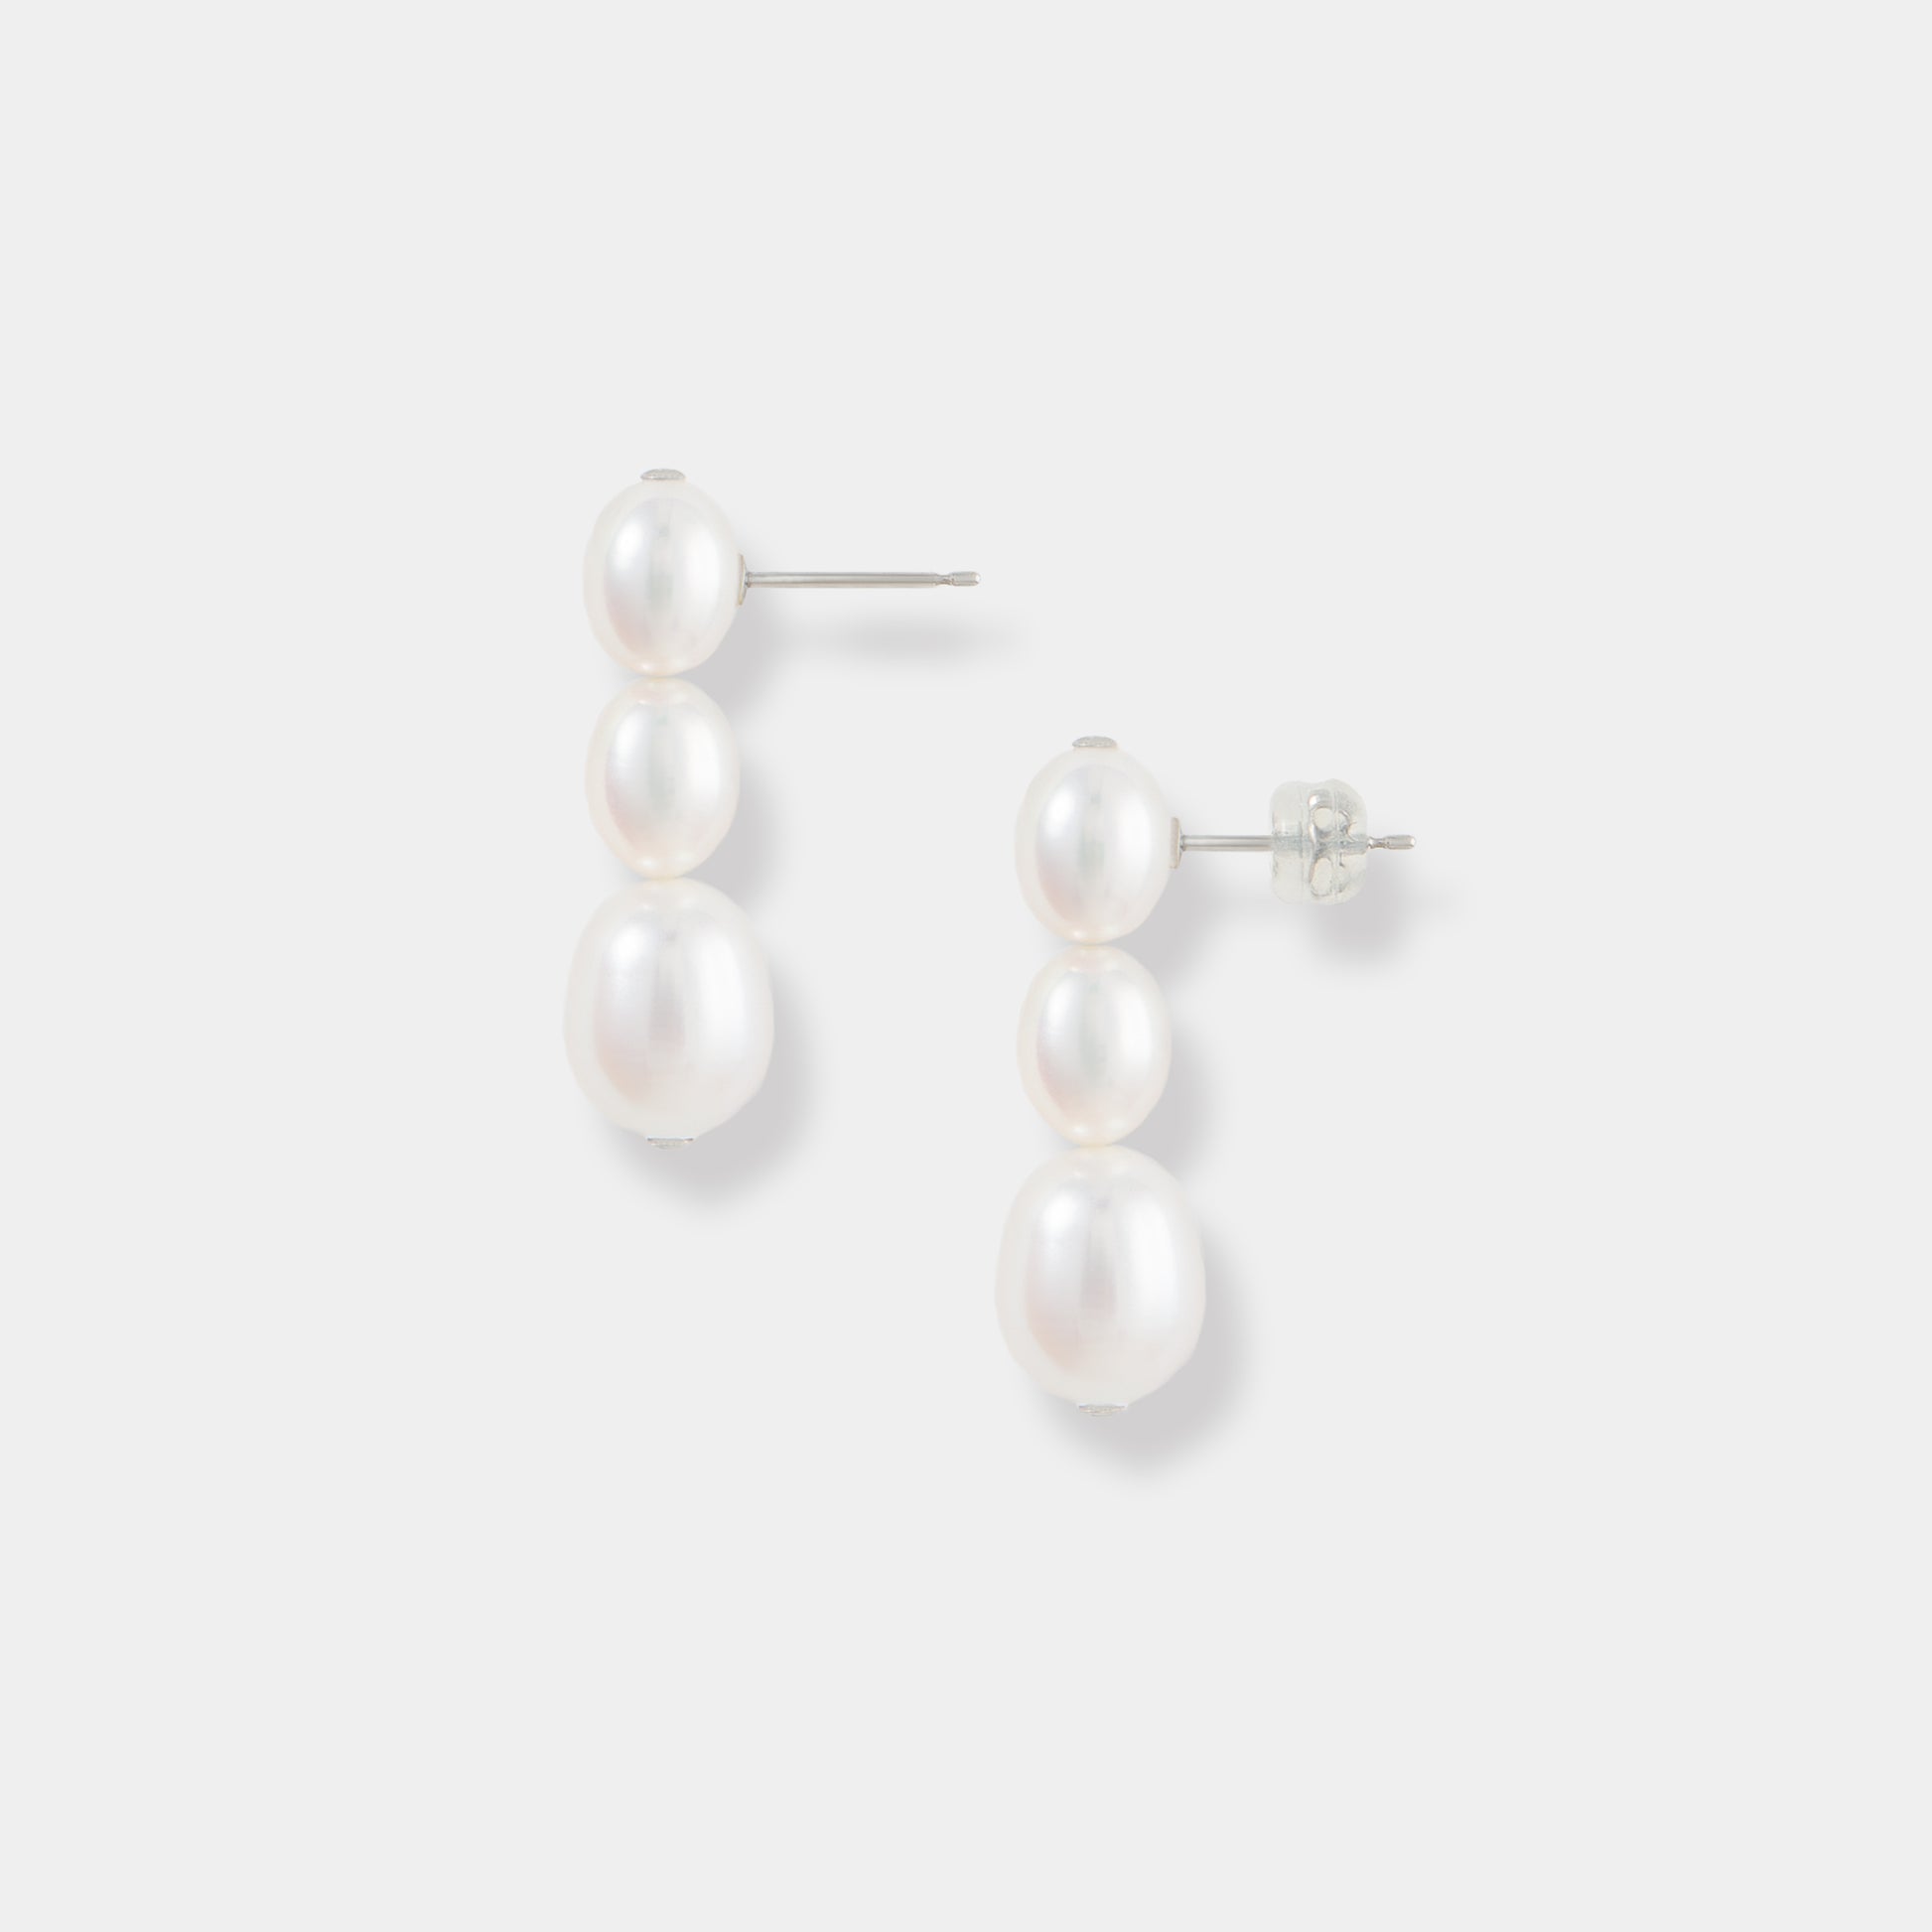 Experience sophistication with these elegant pearl drop earrings showcased on a pure white background. A touch of luxury.